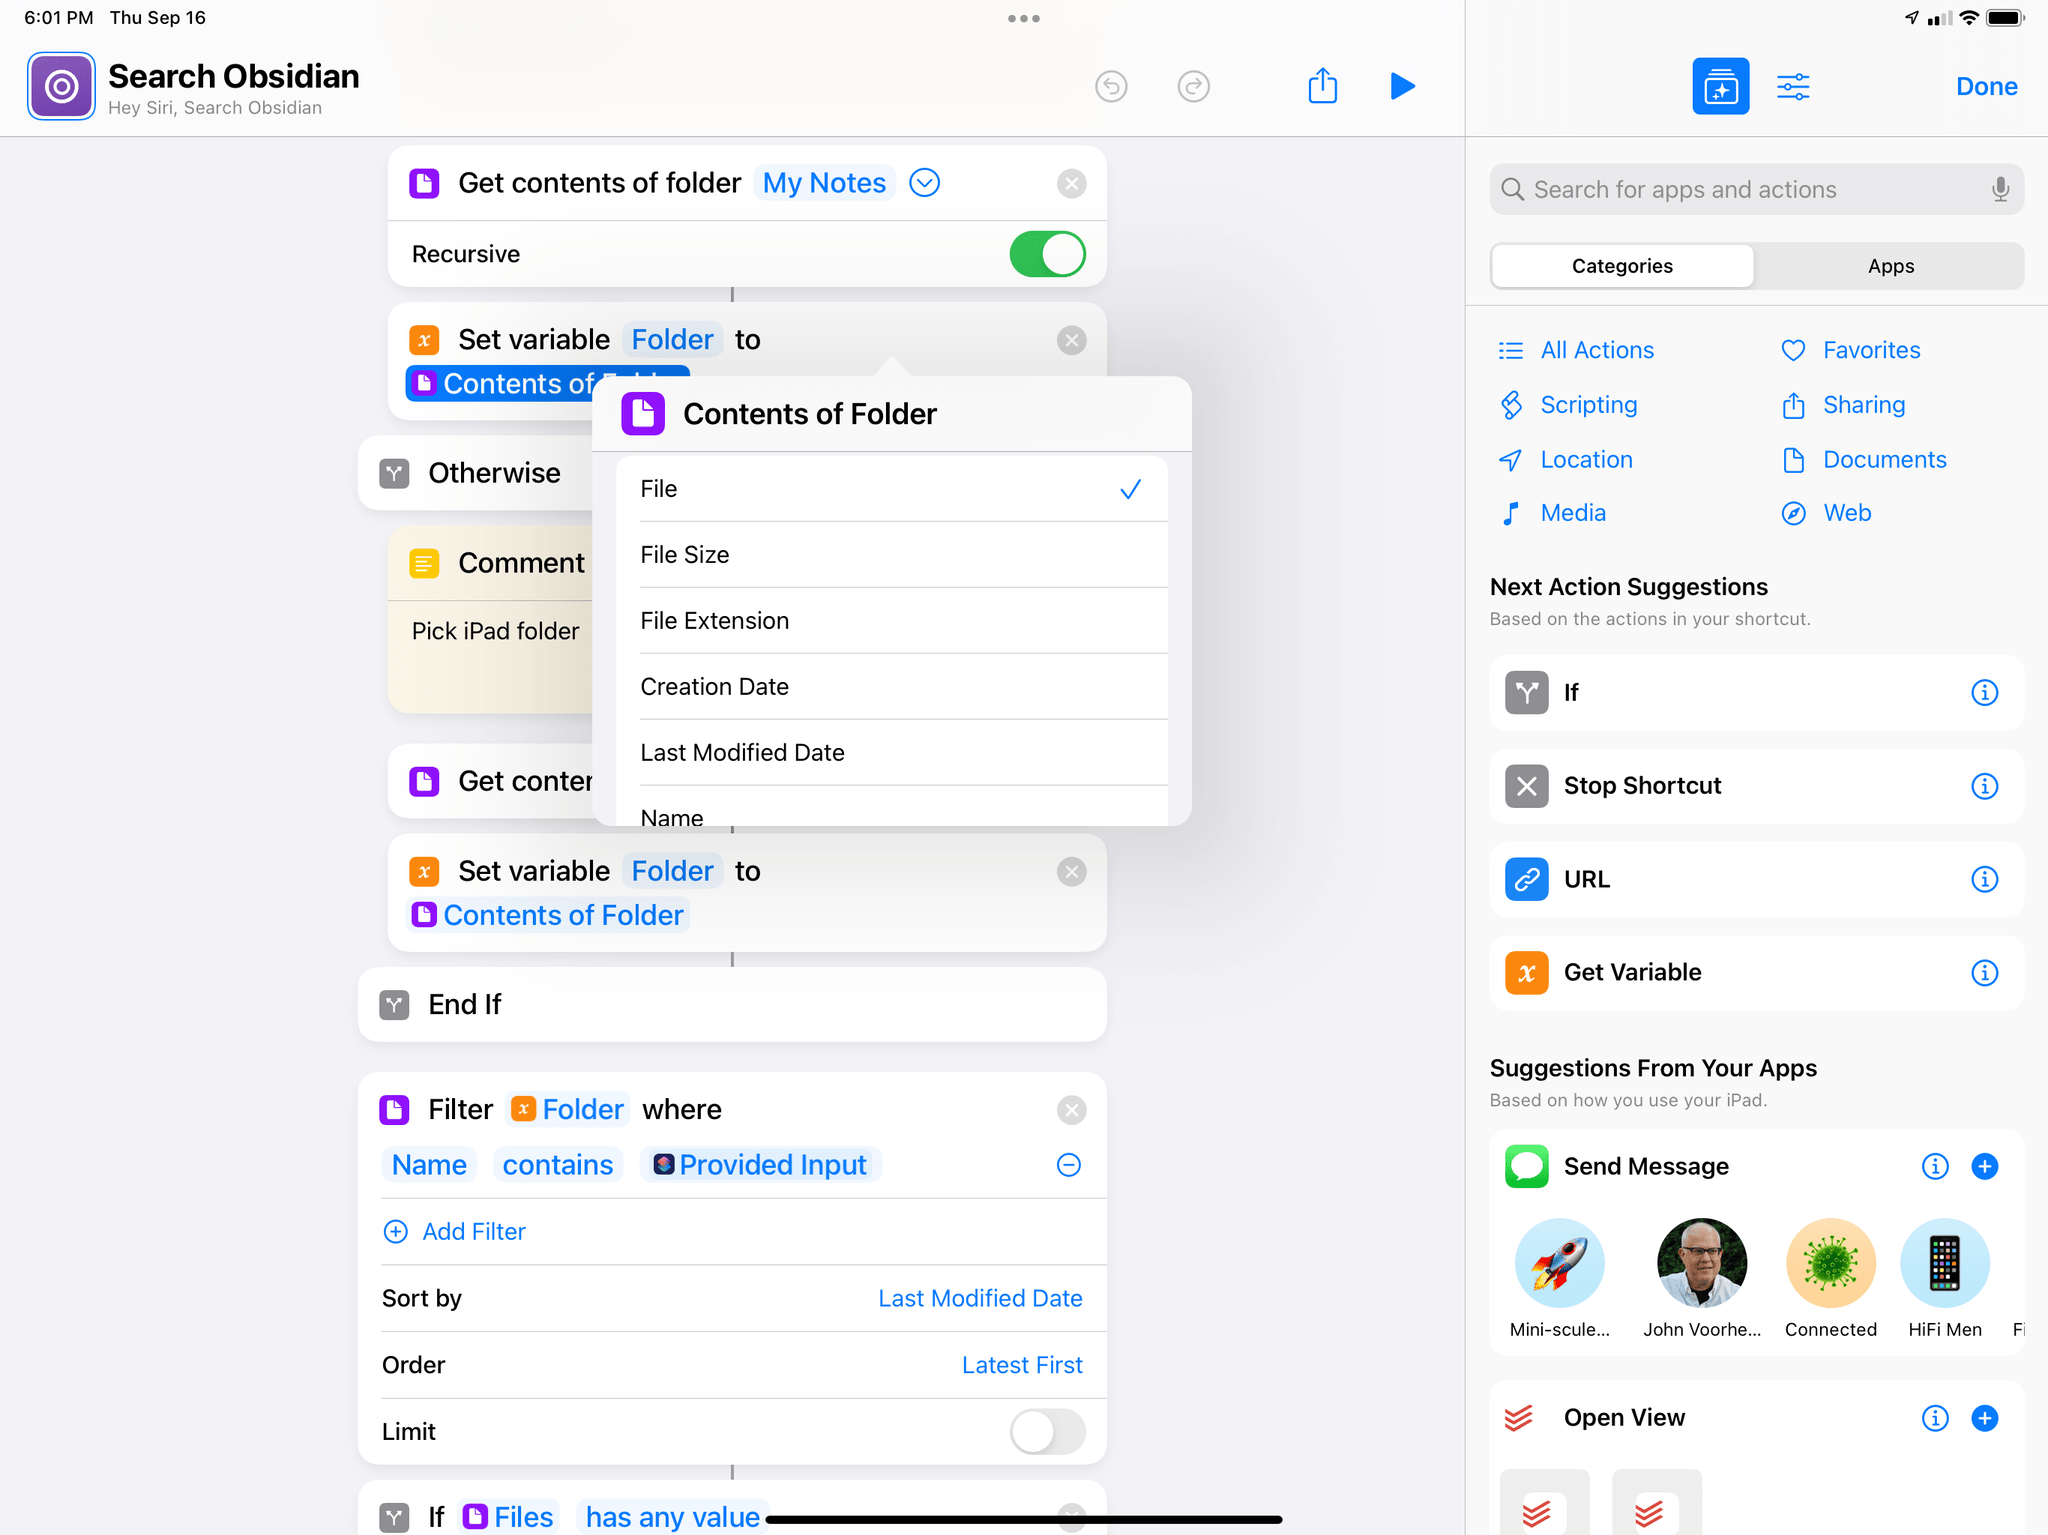 You can get the contents of any folder with the updated Shortcuts app.